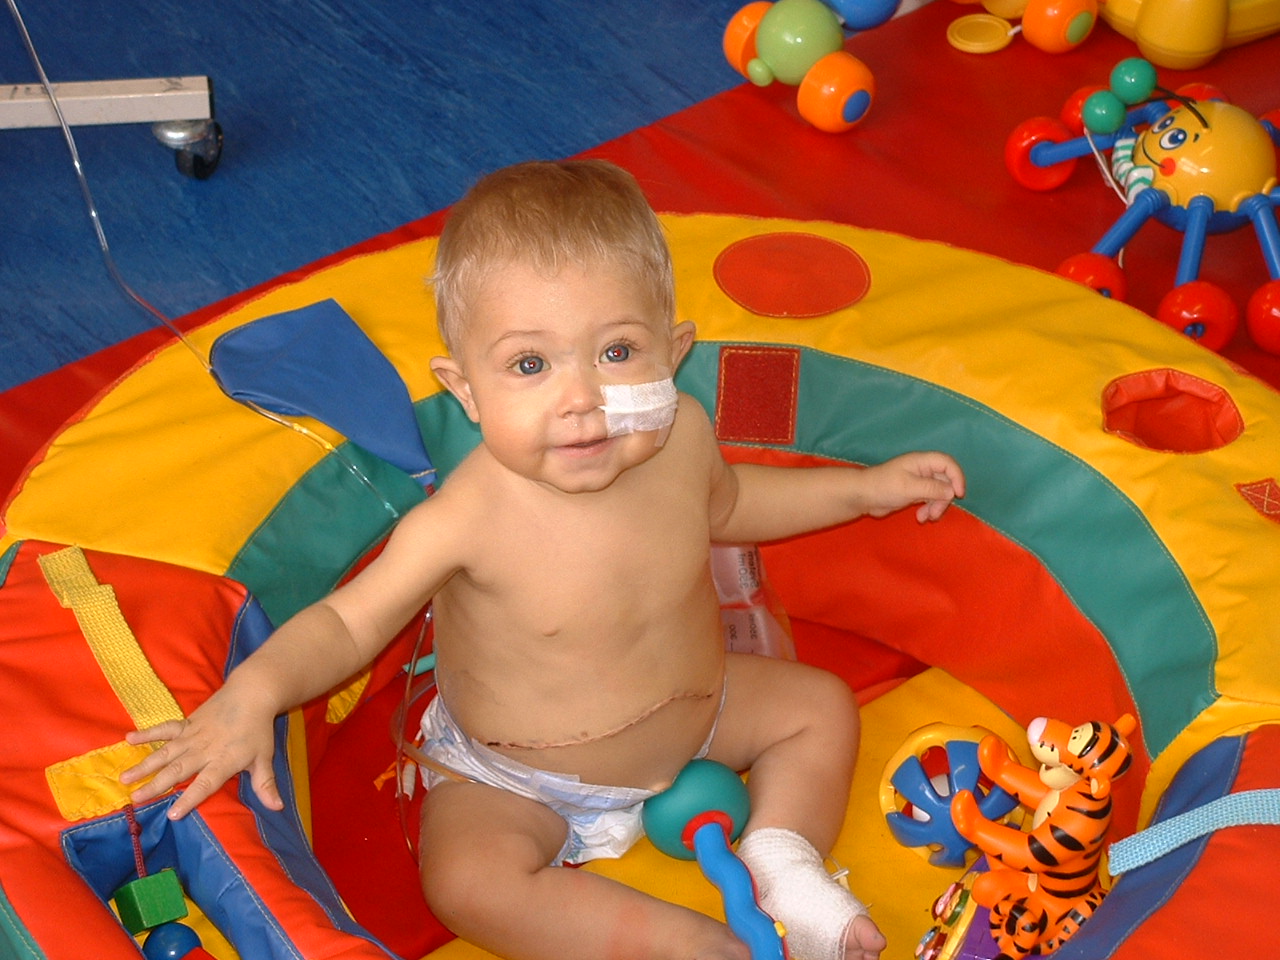 Evan had a liver transplant before his first birthday.